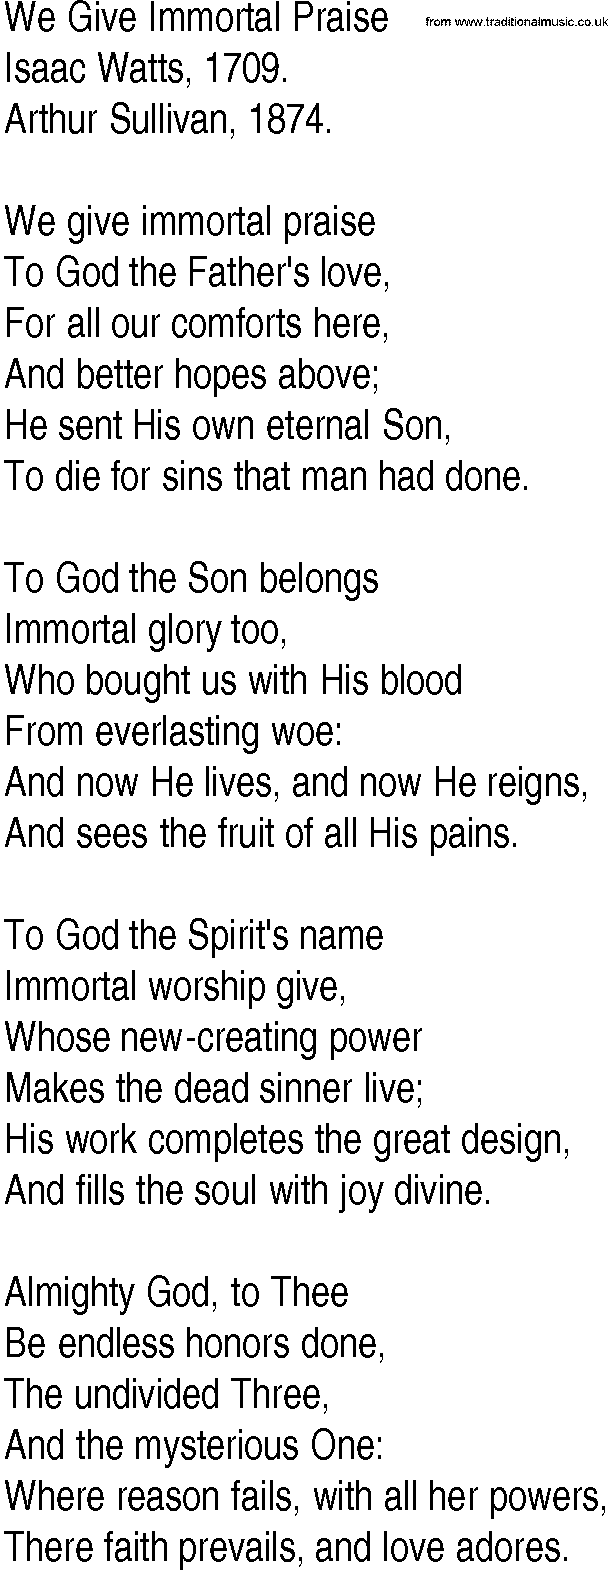 Hymn and Gospel Song: We Give Immortal Praise by Isaac Watts lyrics